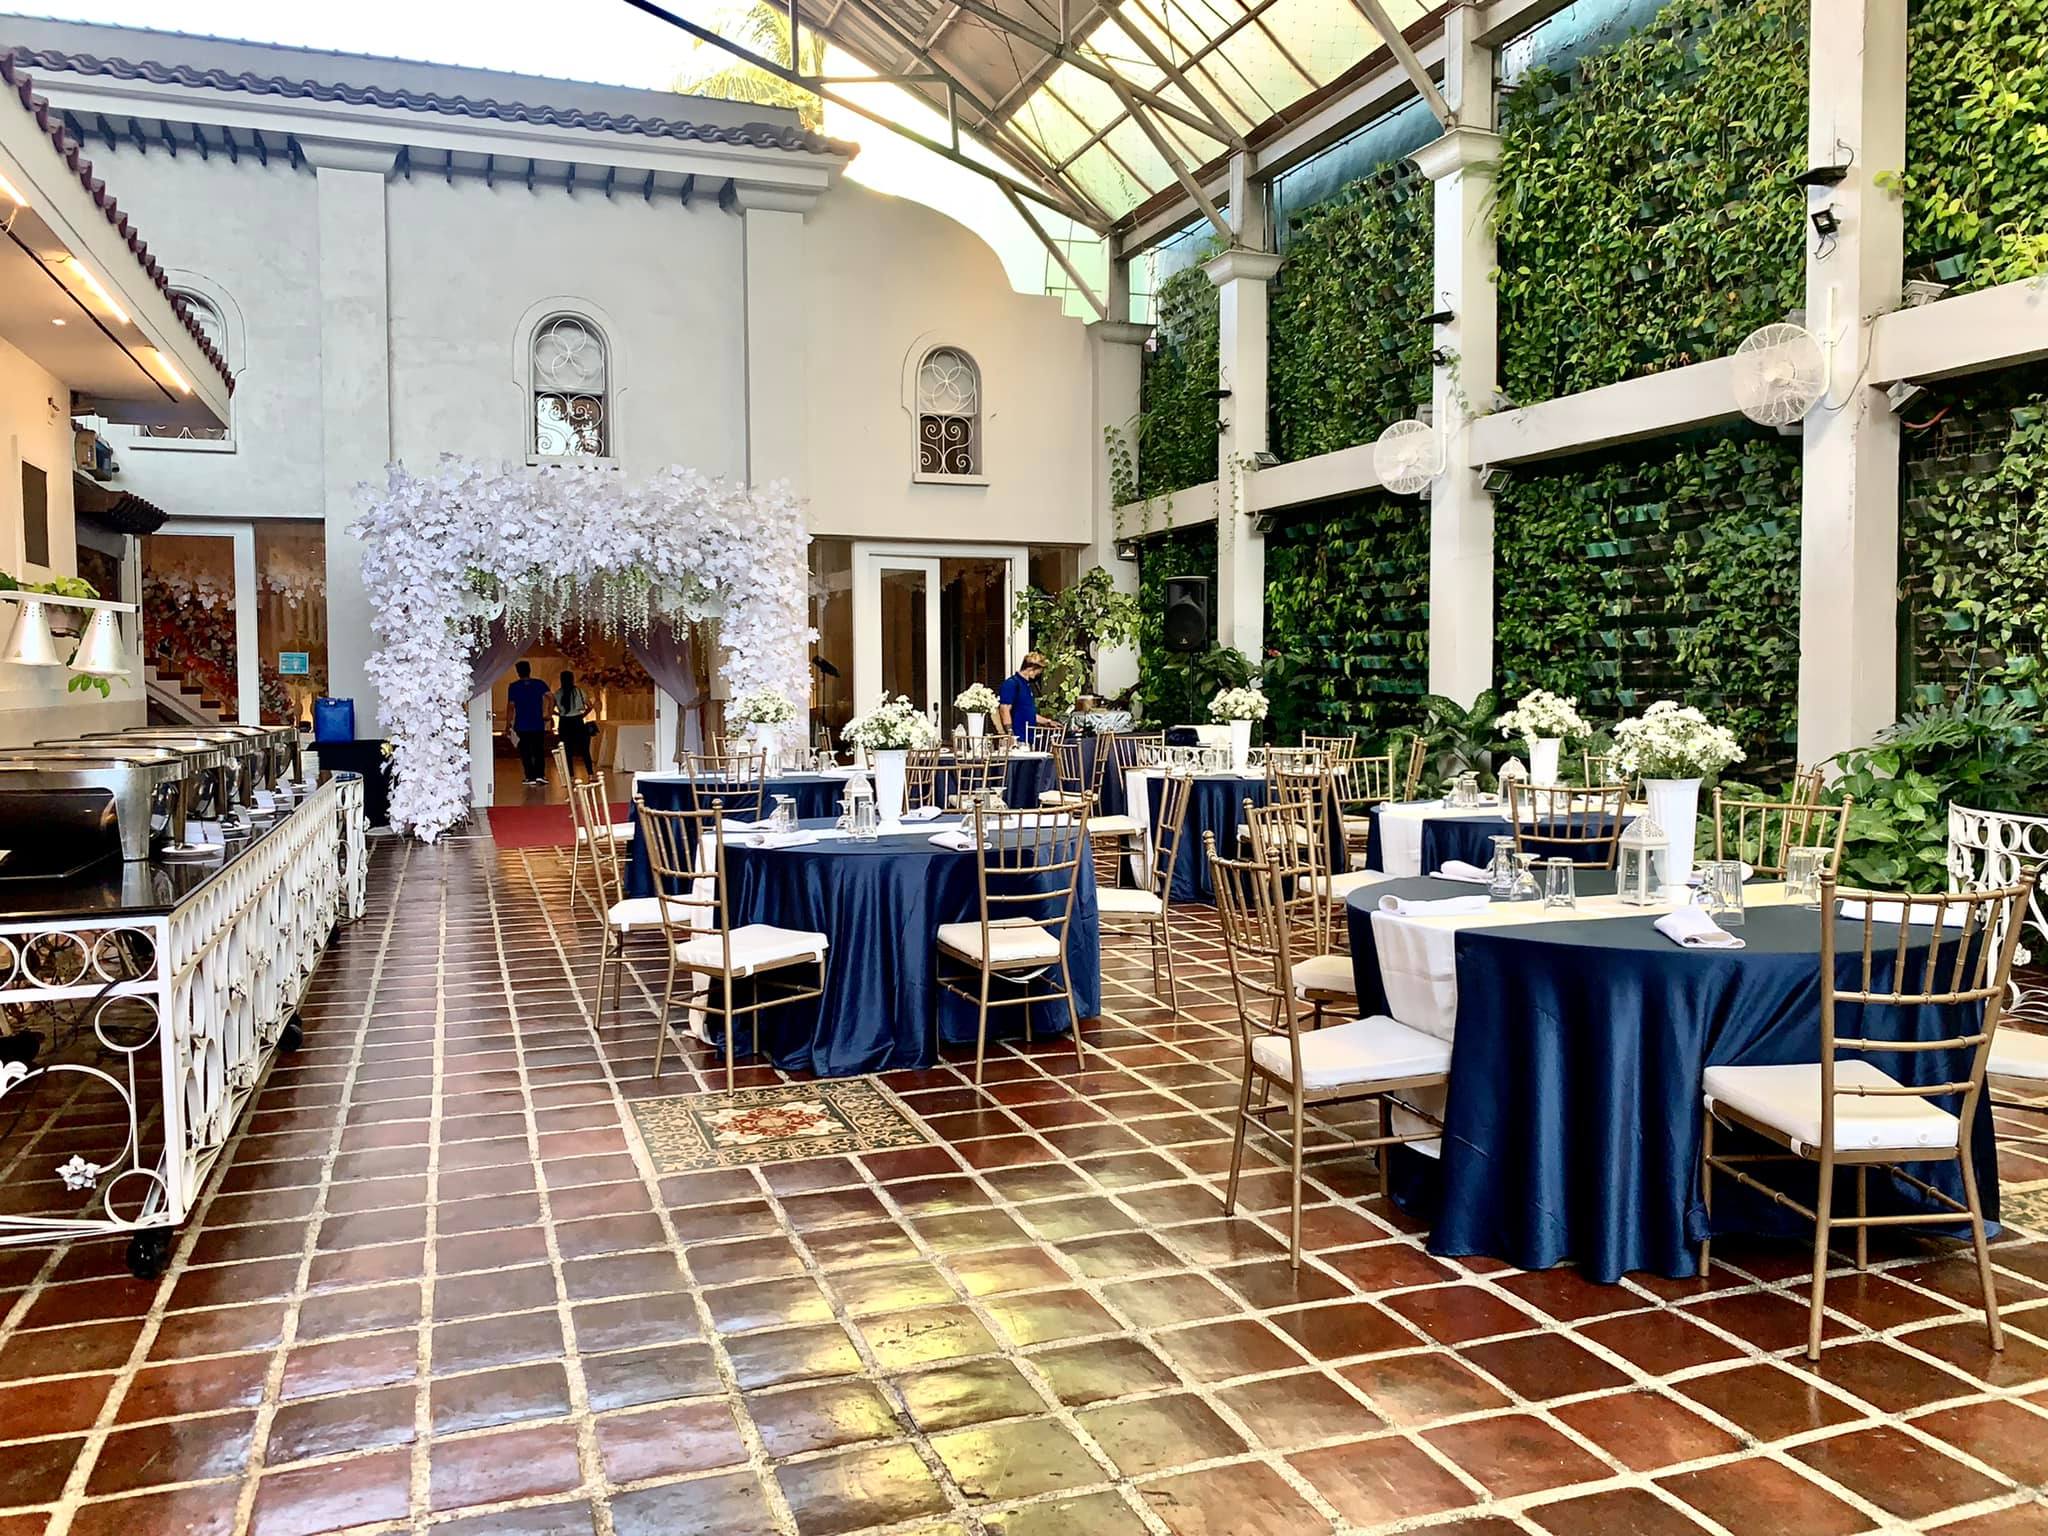 Alfresco dining for intimate celebrations